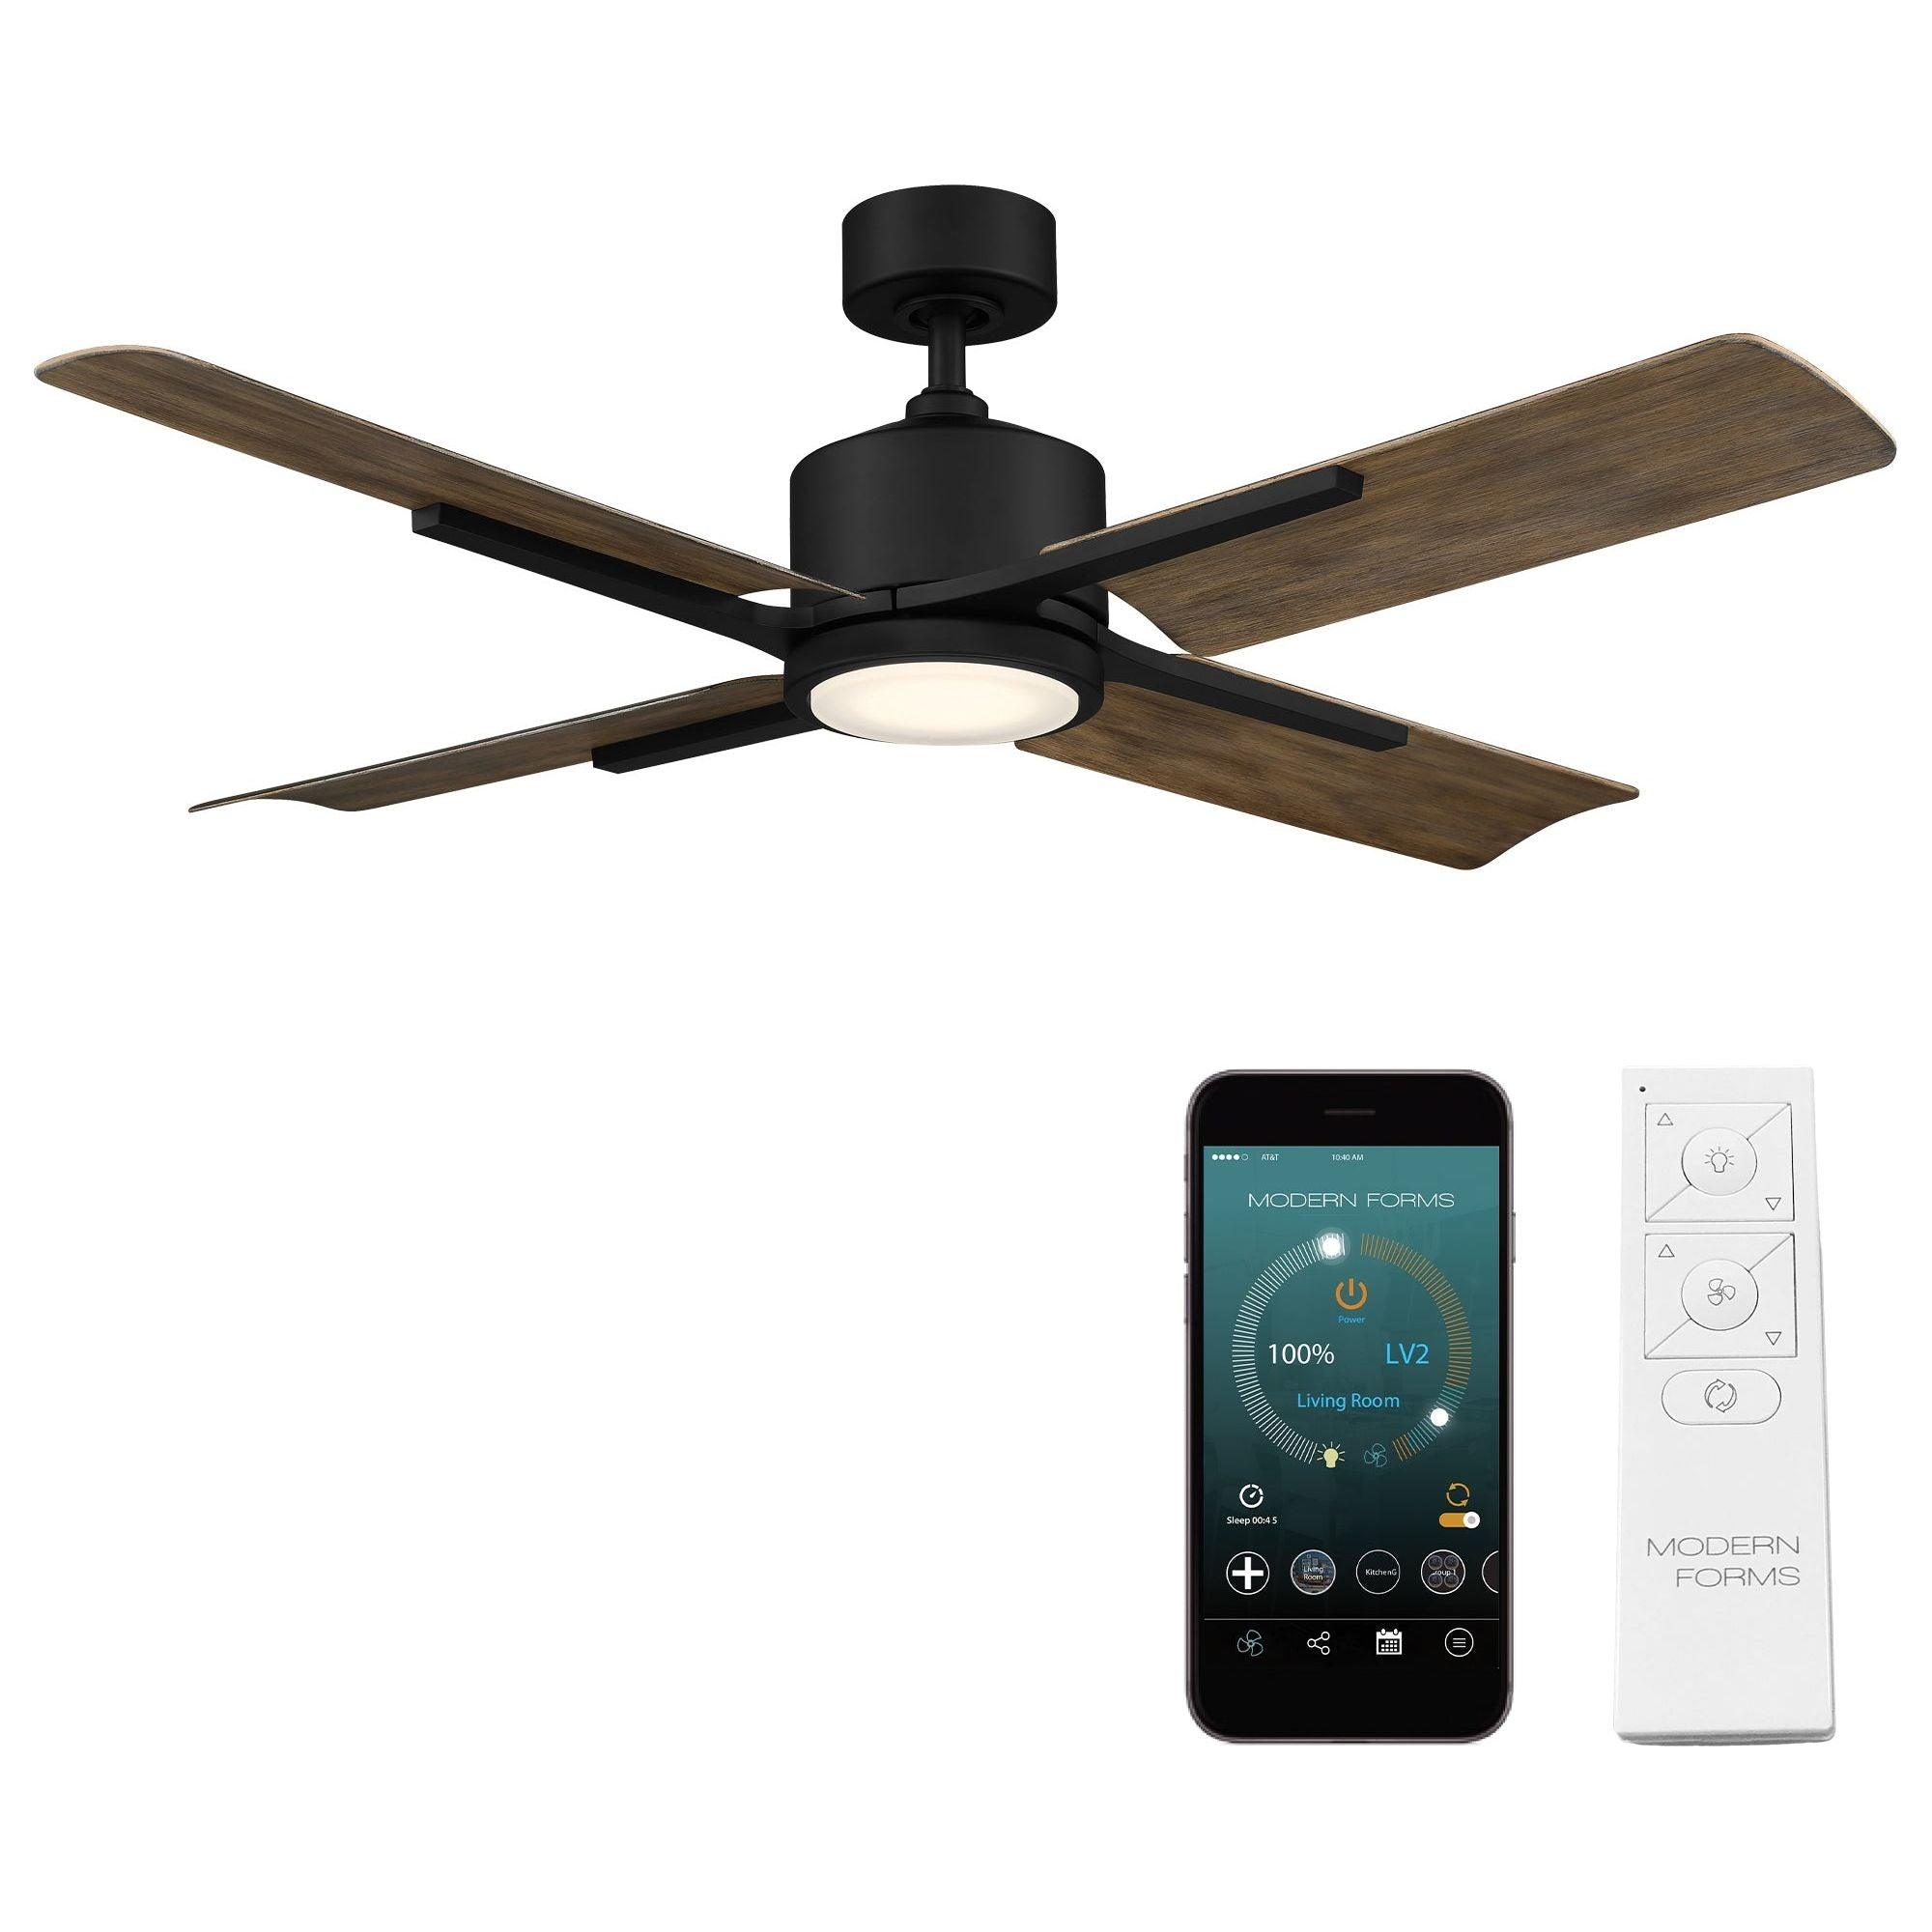 Modern Forms - Cervantes Indoor/Outdoor 4-Blade 56" Smart Ceiling Fan with LED Light Kit and Remote Control - Lights Canada